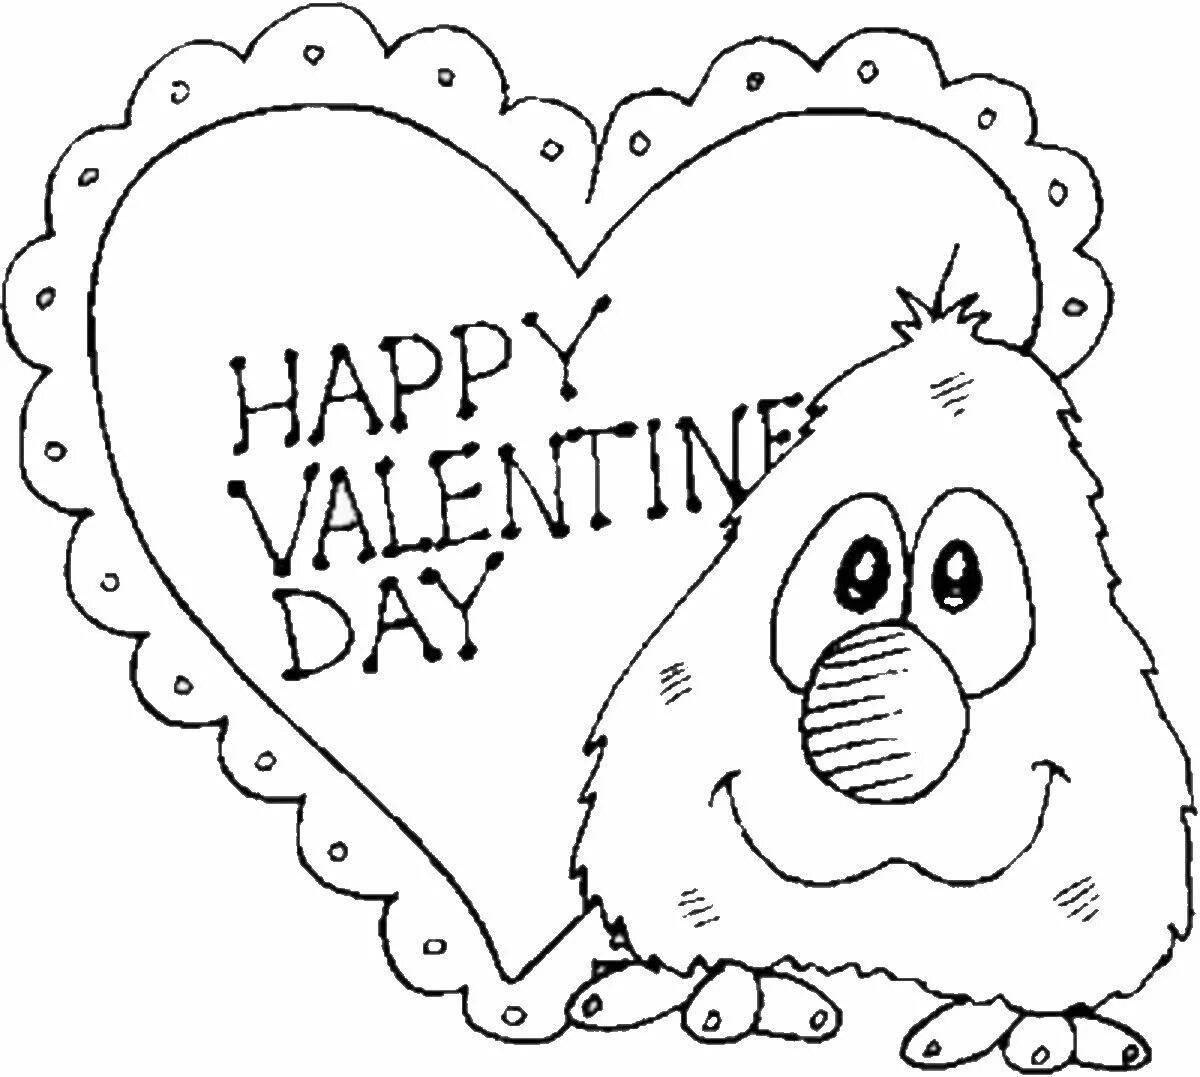 Fun valentine's day coloring book for kids